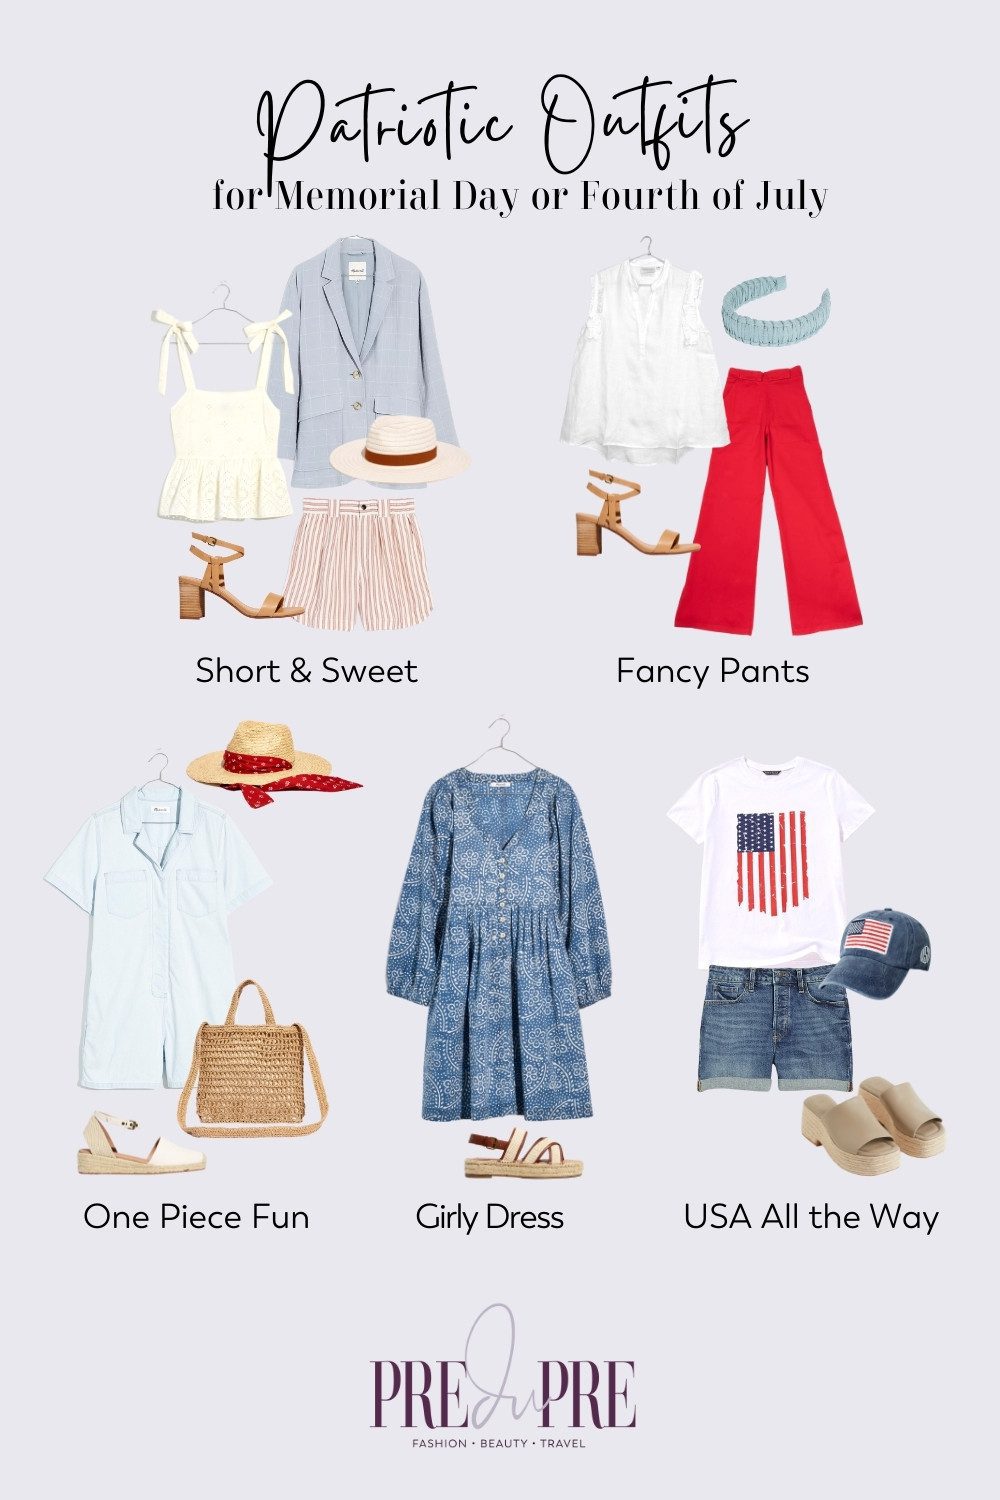 Collage of patriotic outfit ideas for Memorial Day and/or Independence Day on Fourth of July